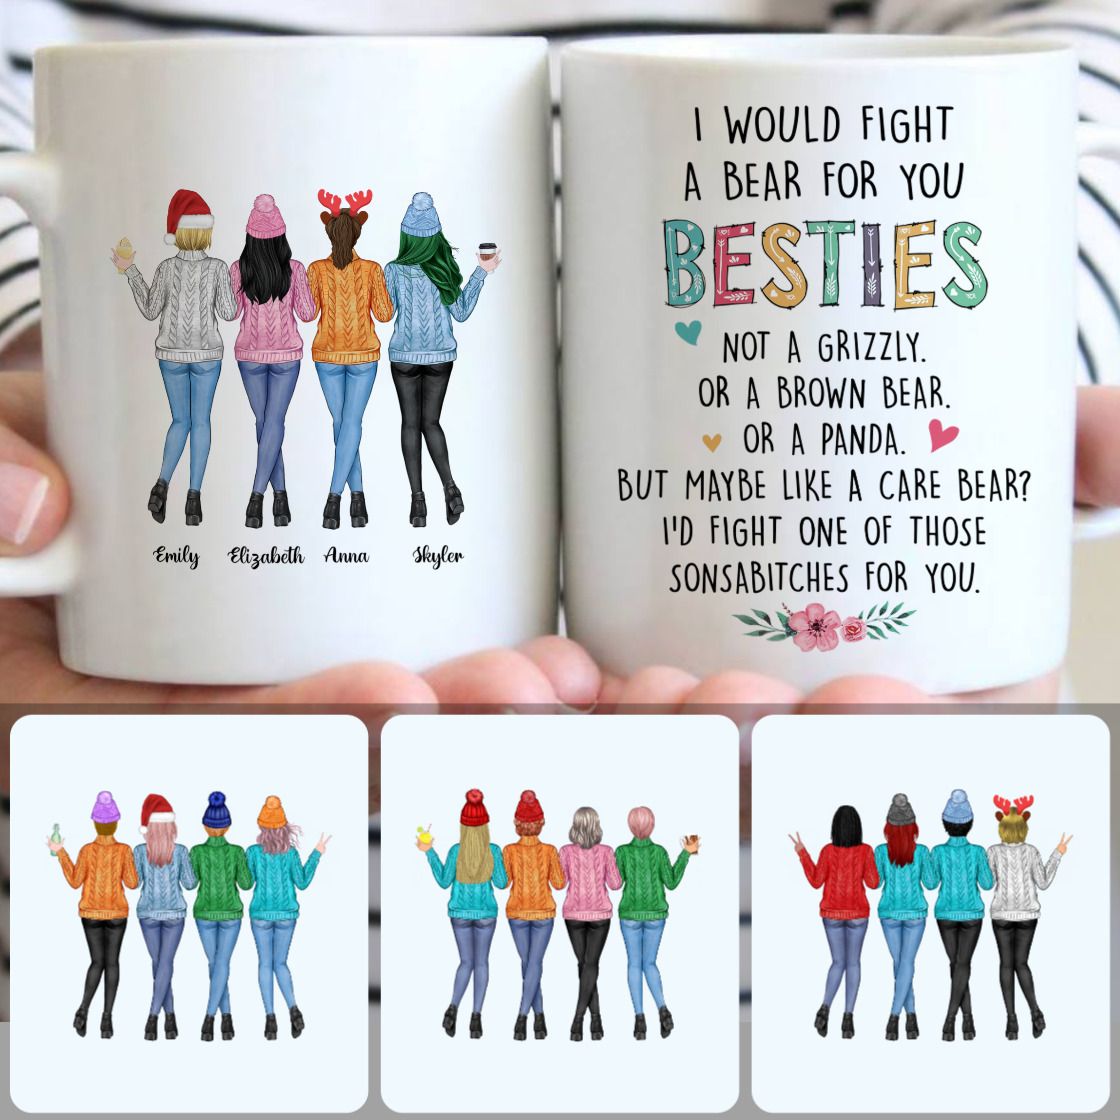 Personalized Mug, Meaningful Christmas Gifts, 4 Best Friends - Always Together Customized Coffee Mug With Names